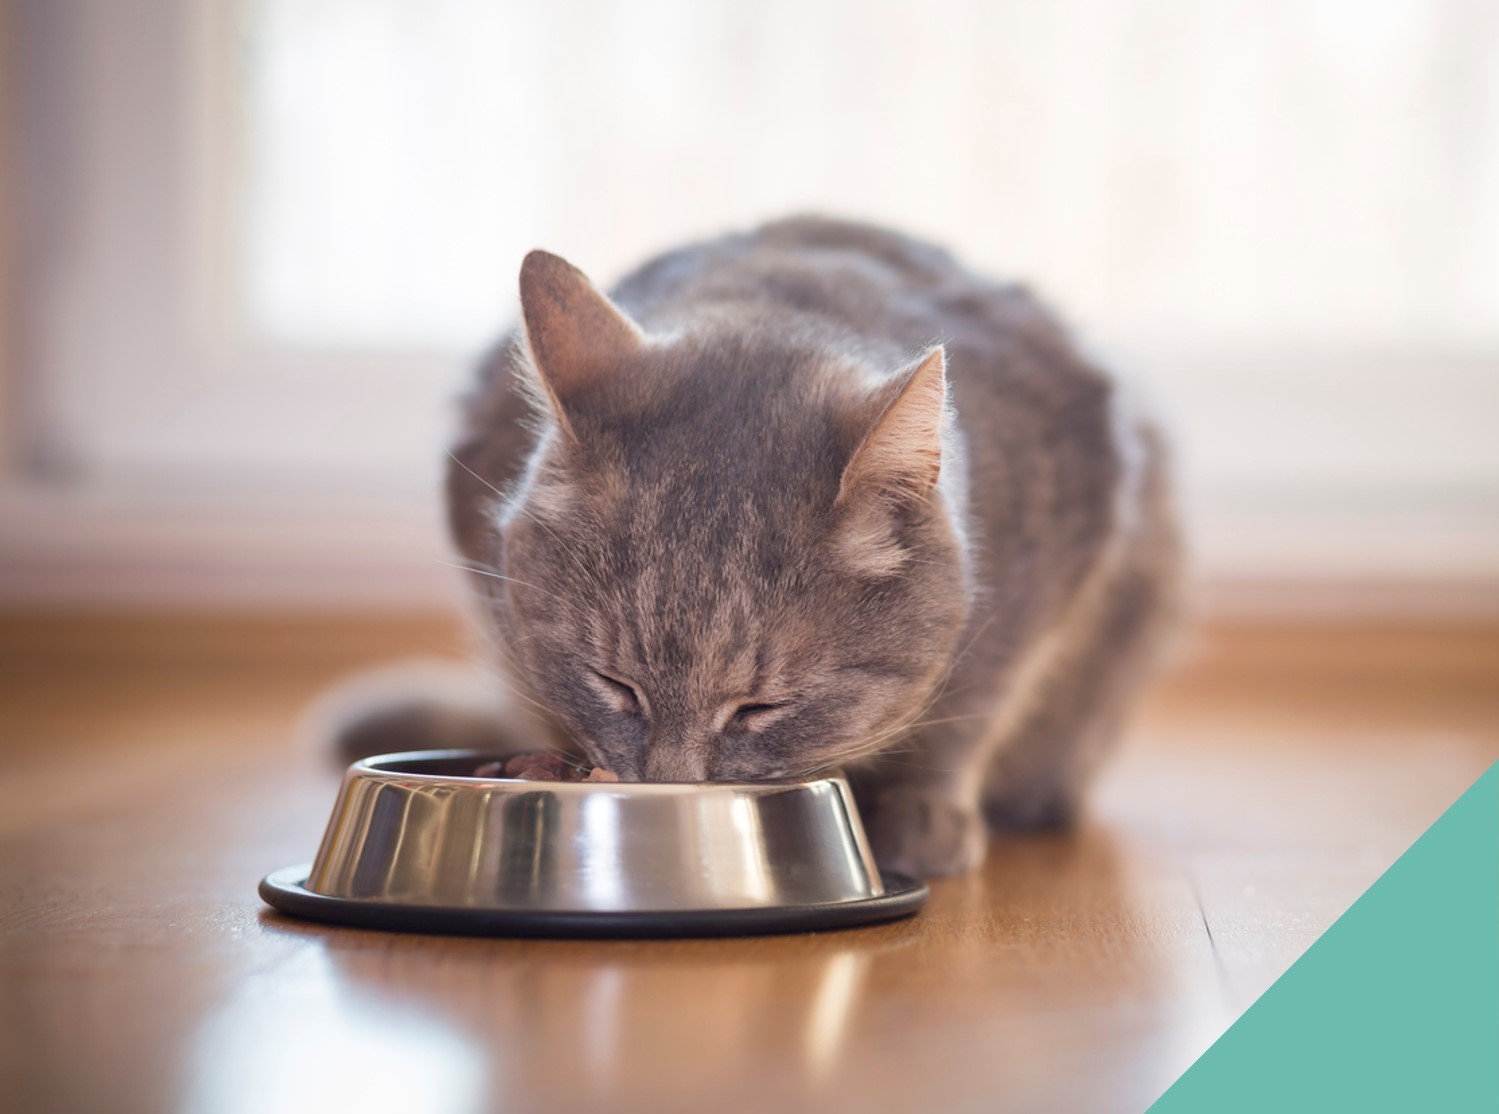 A cat eating out of a silver bowl